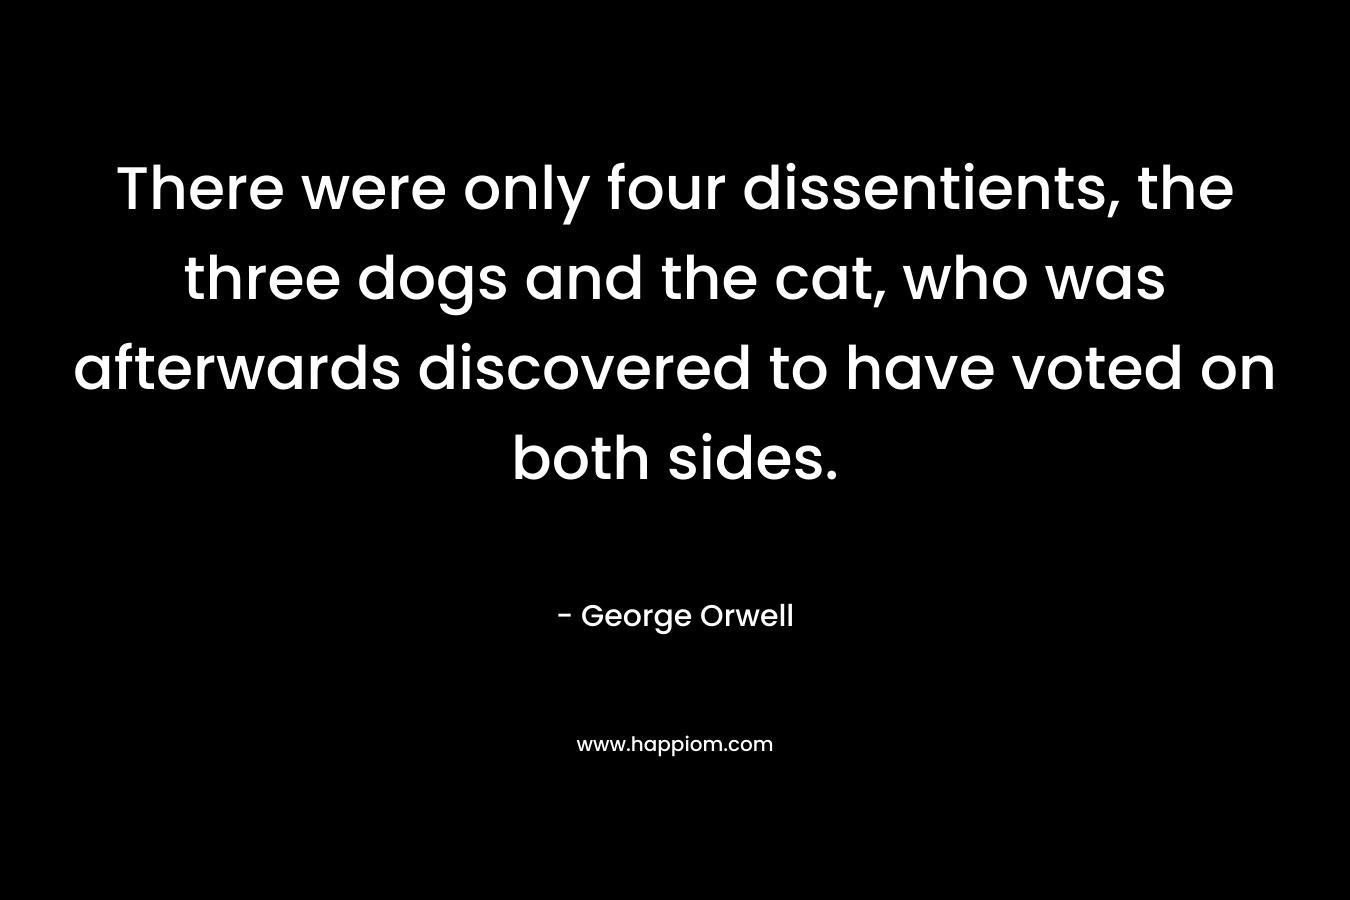 There were only four dissentients, the three dogs and the cat, who was afterwards discovered to have voted on both sides. – George Orwell